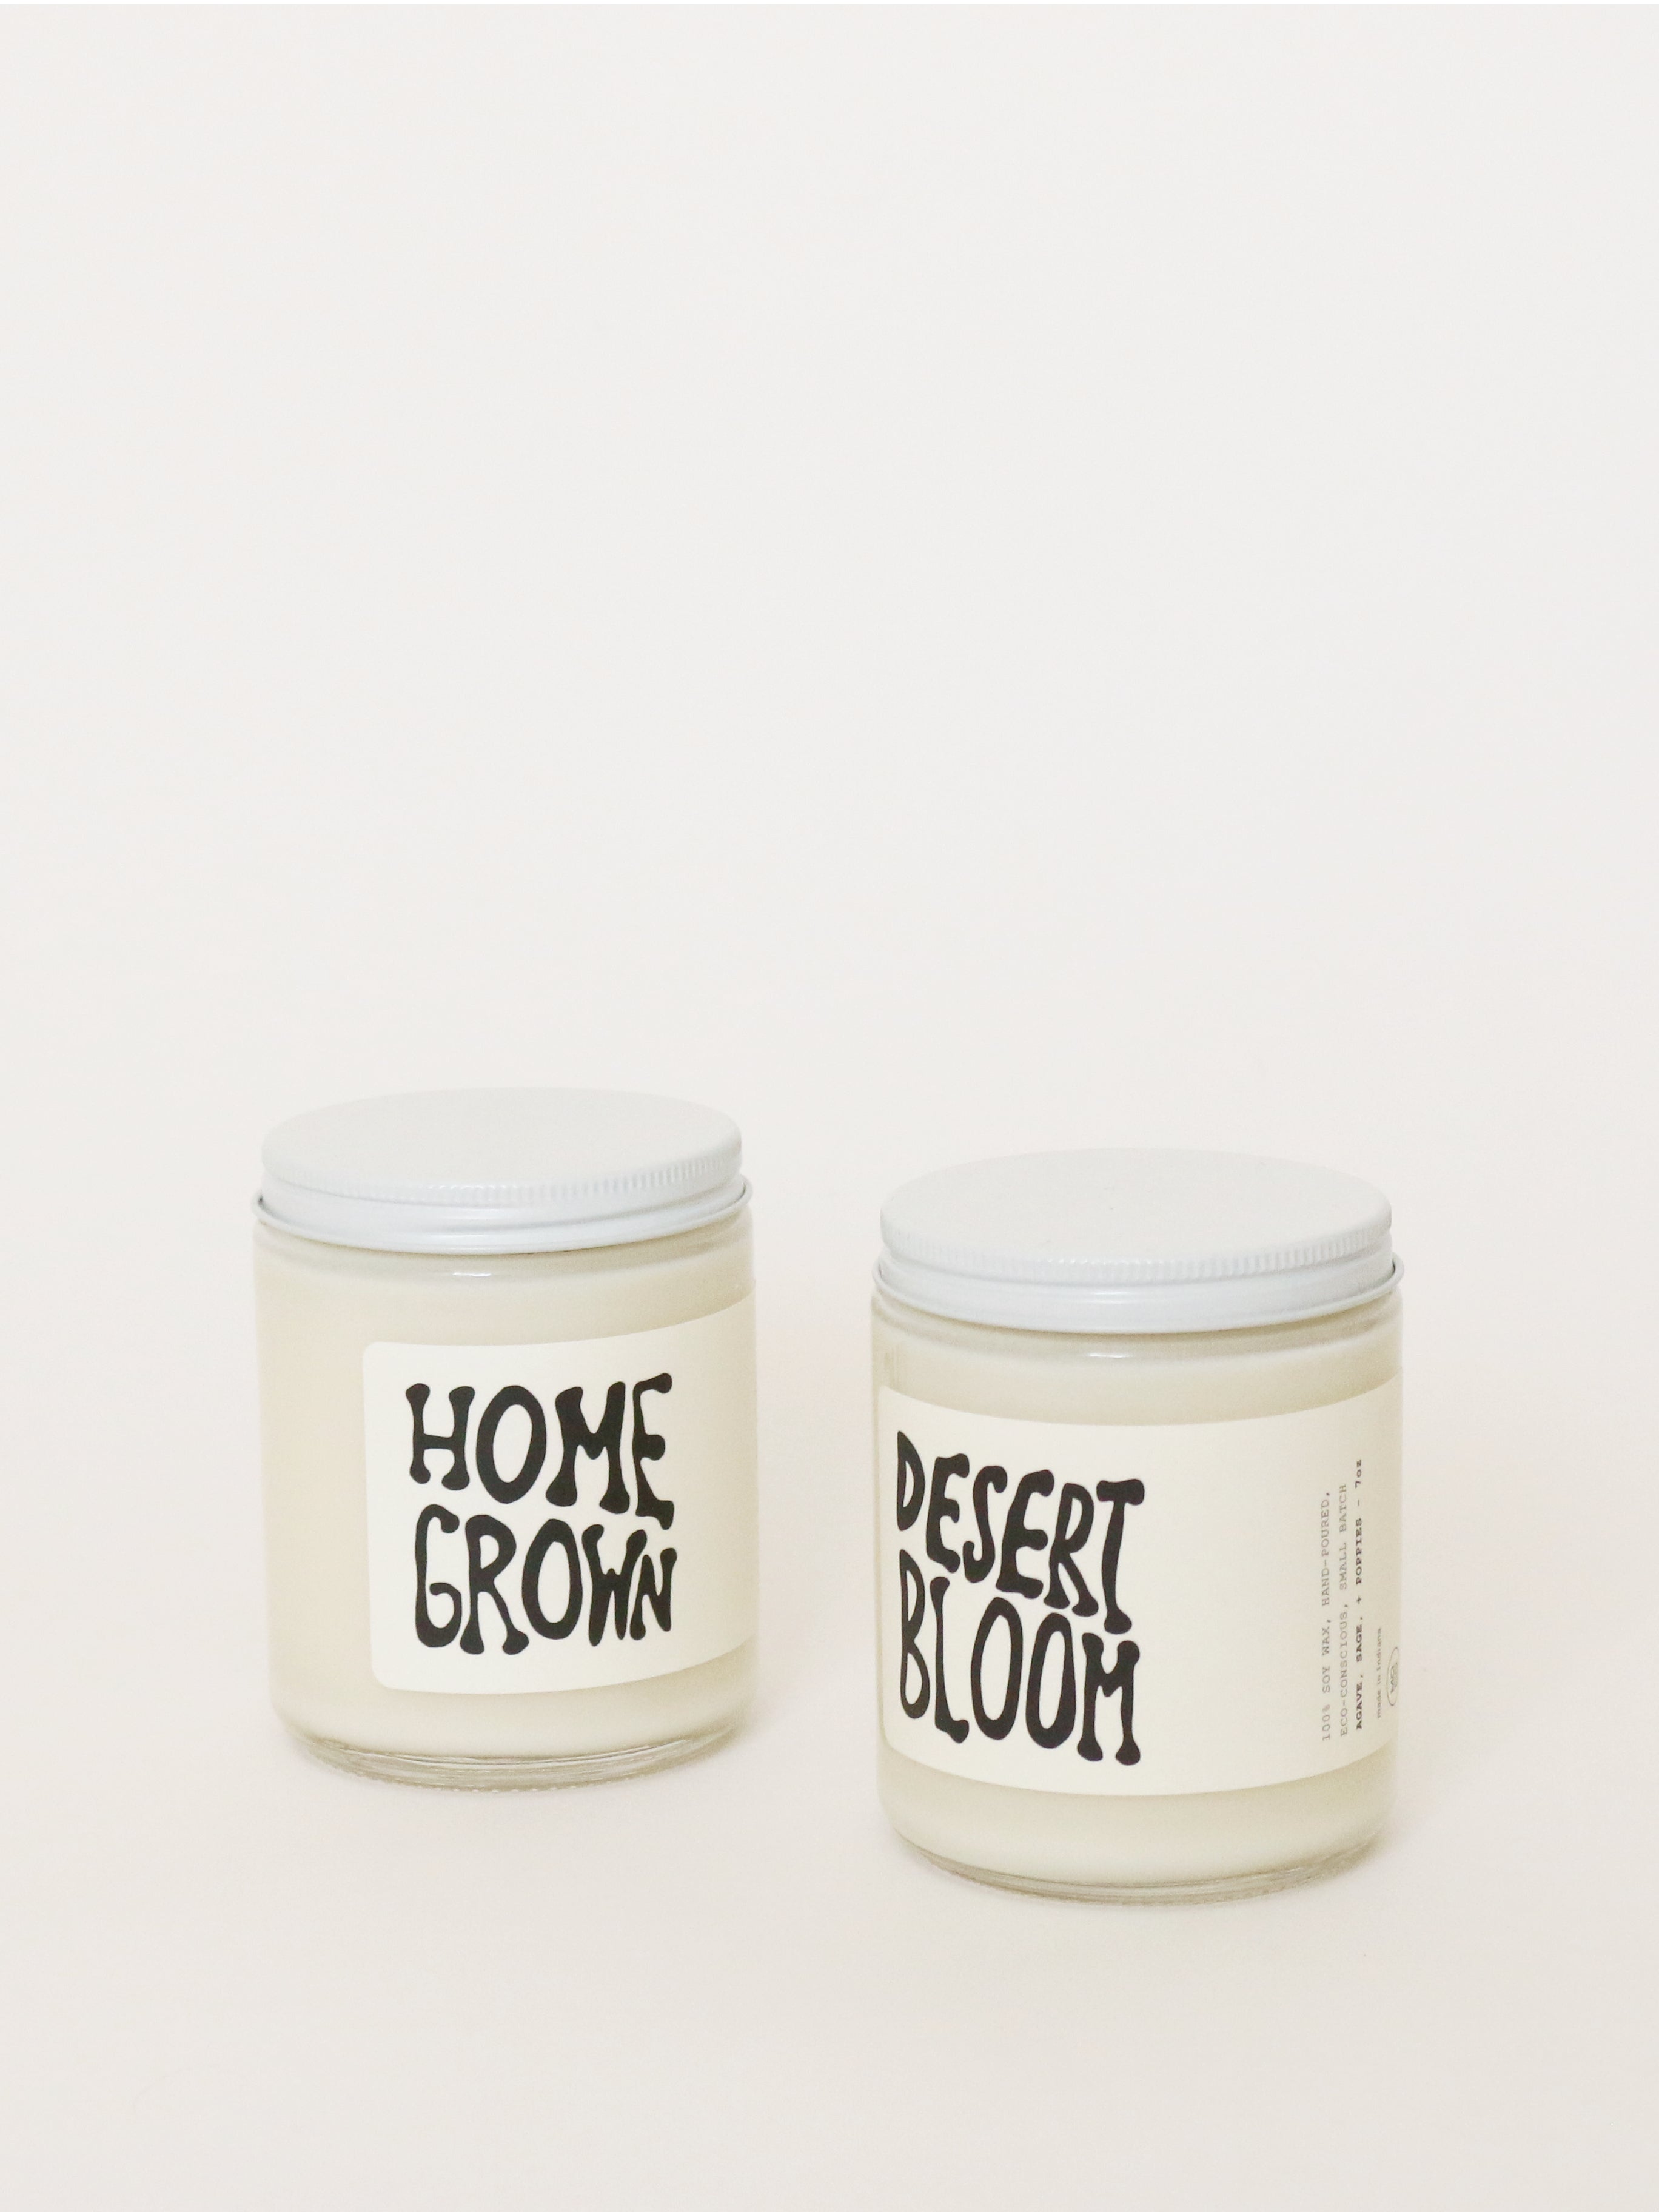 Home Grown Soy Candle by MOCO Candles